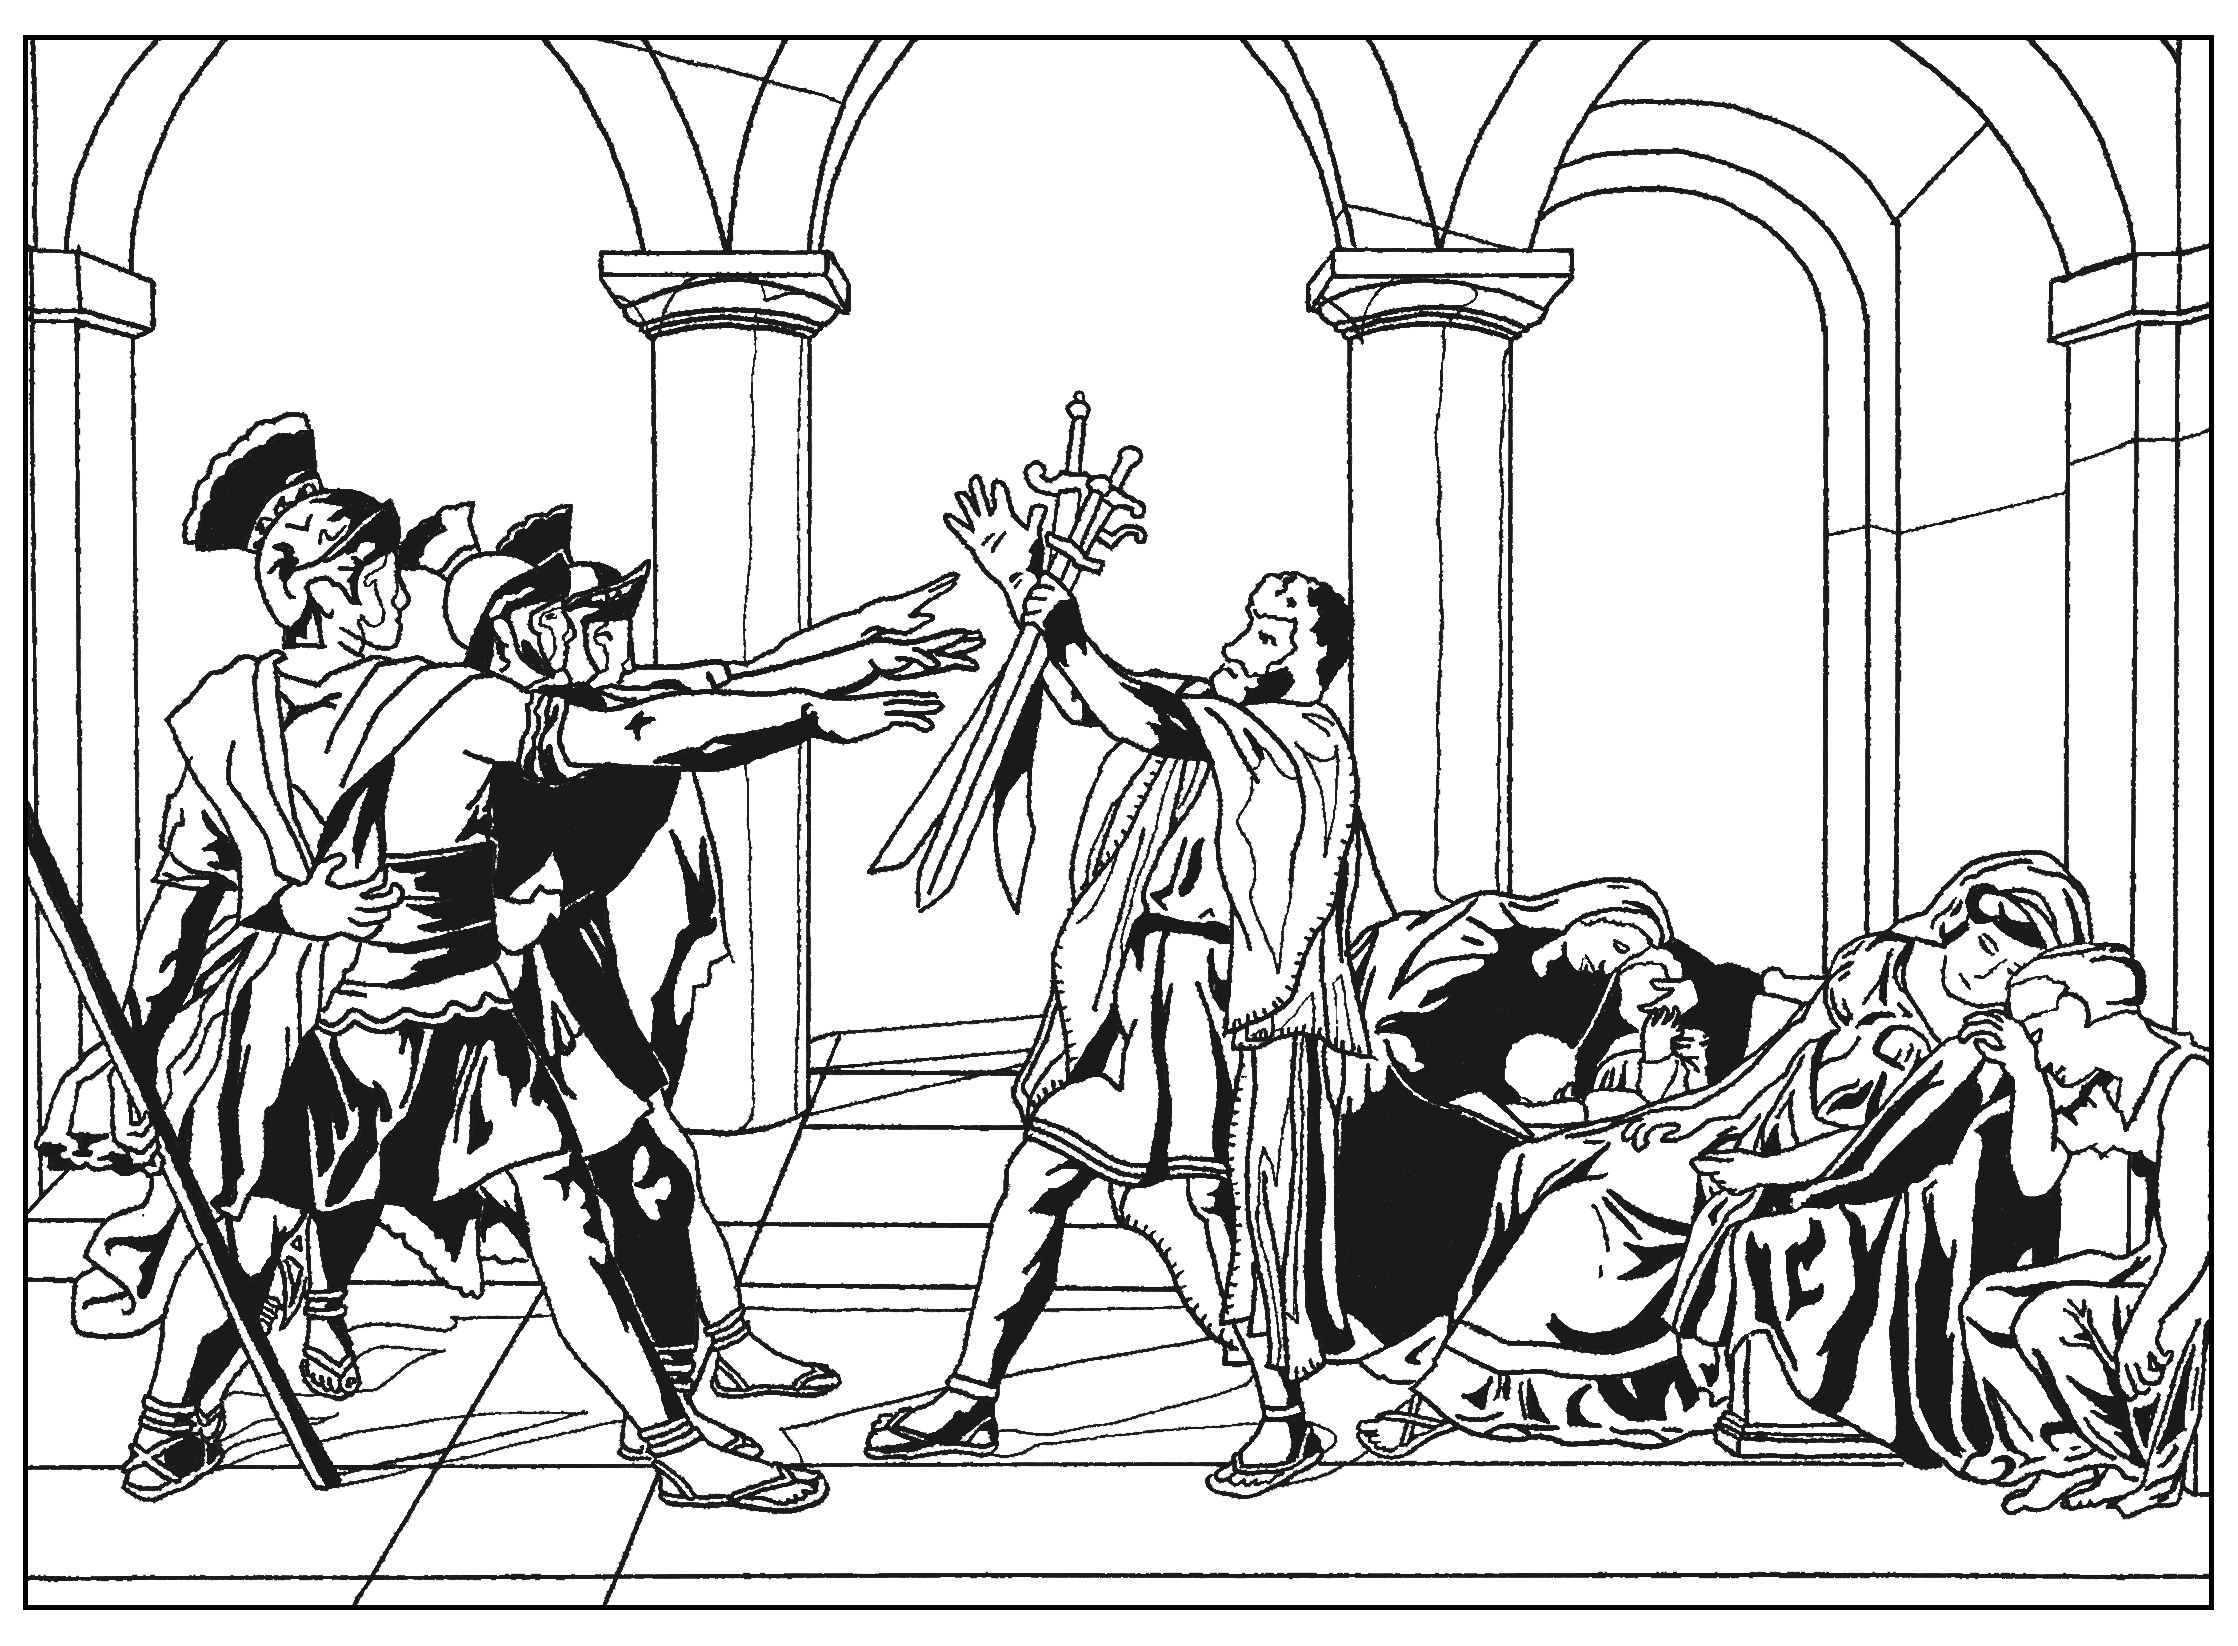 Coloring page created from the painting 'Oath of the Horatii' (Neoclassical style) by Jacques-Louis David, finished in 1785. Drawing